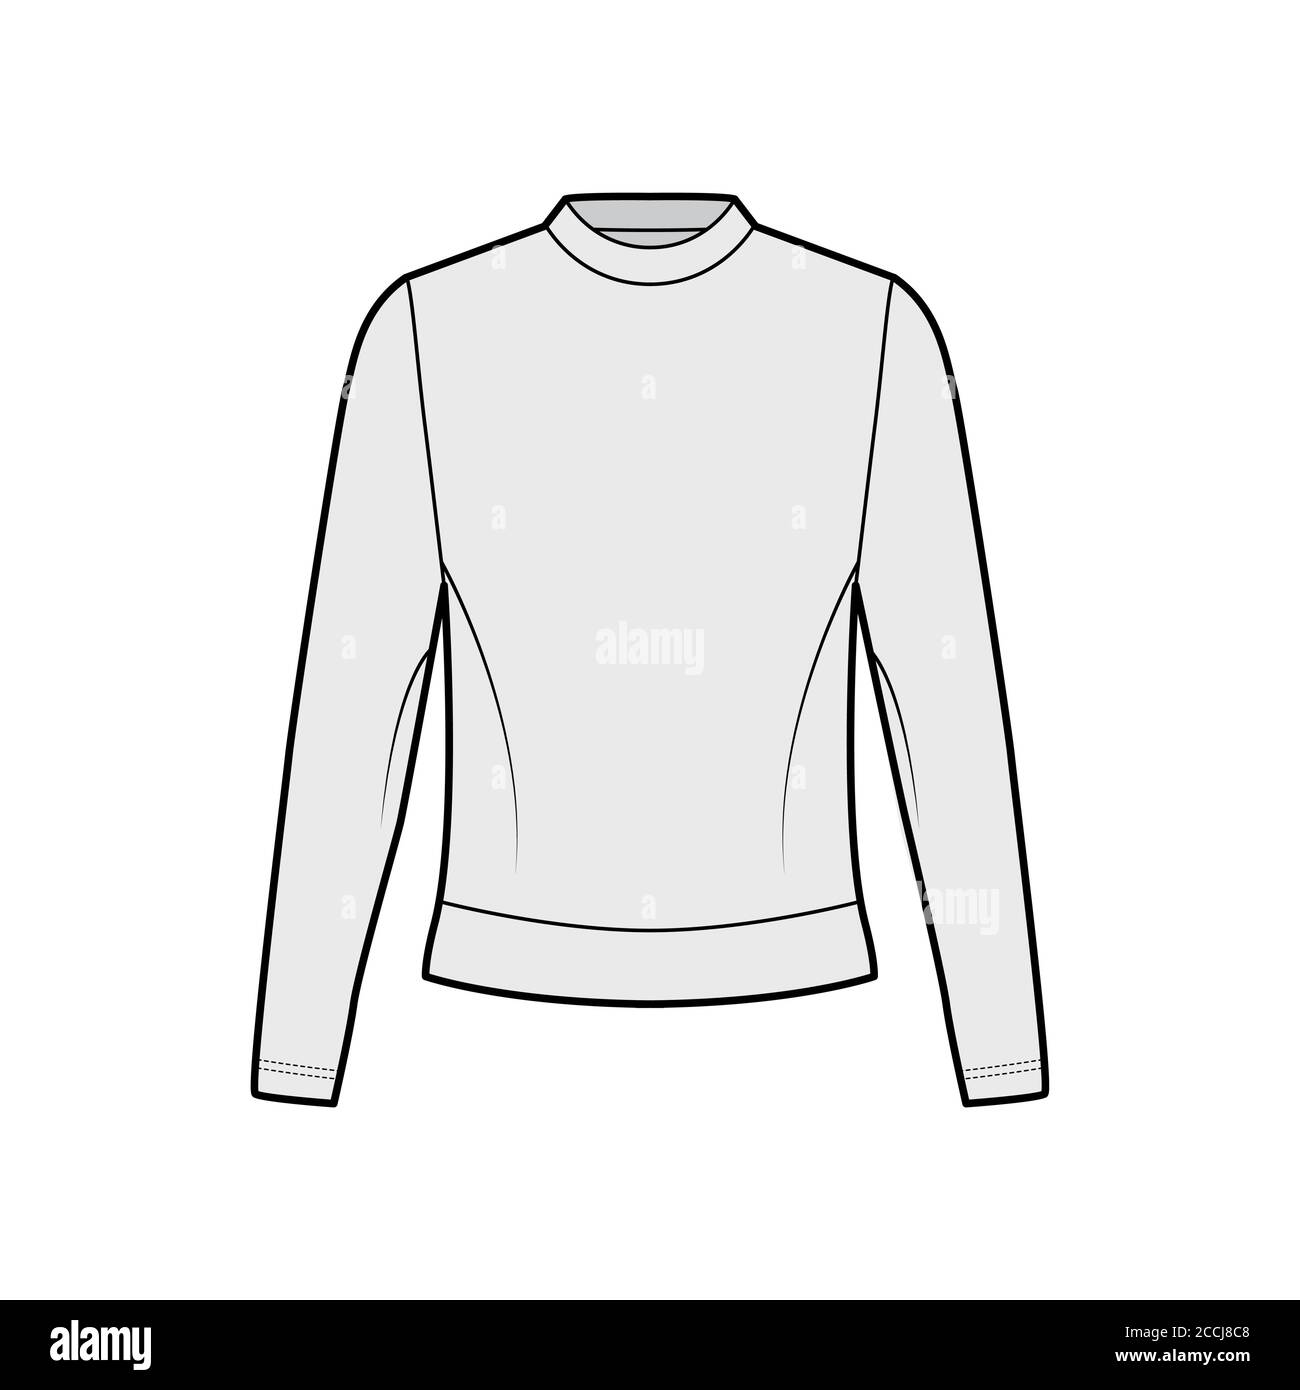 Cotton-terry sweatshirt technical fashion illustration with crew neckline, long sleeves, oversized. Flat jumper apparel outwear template front, grey color. Women, men, unisex top CAD mockup Stock Vector